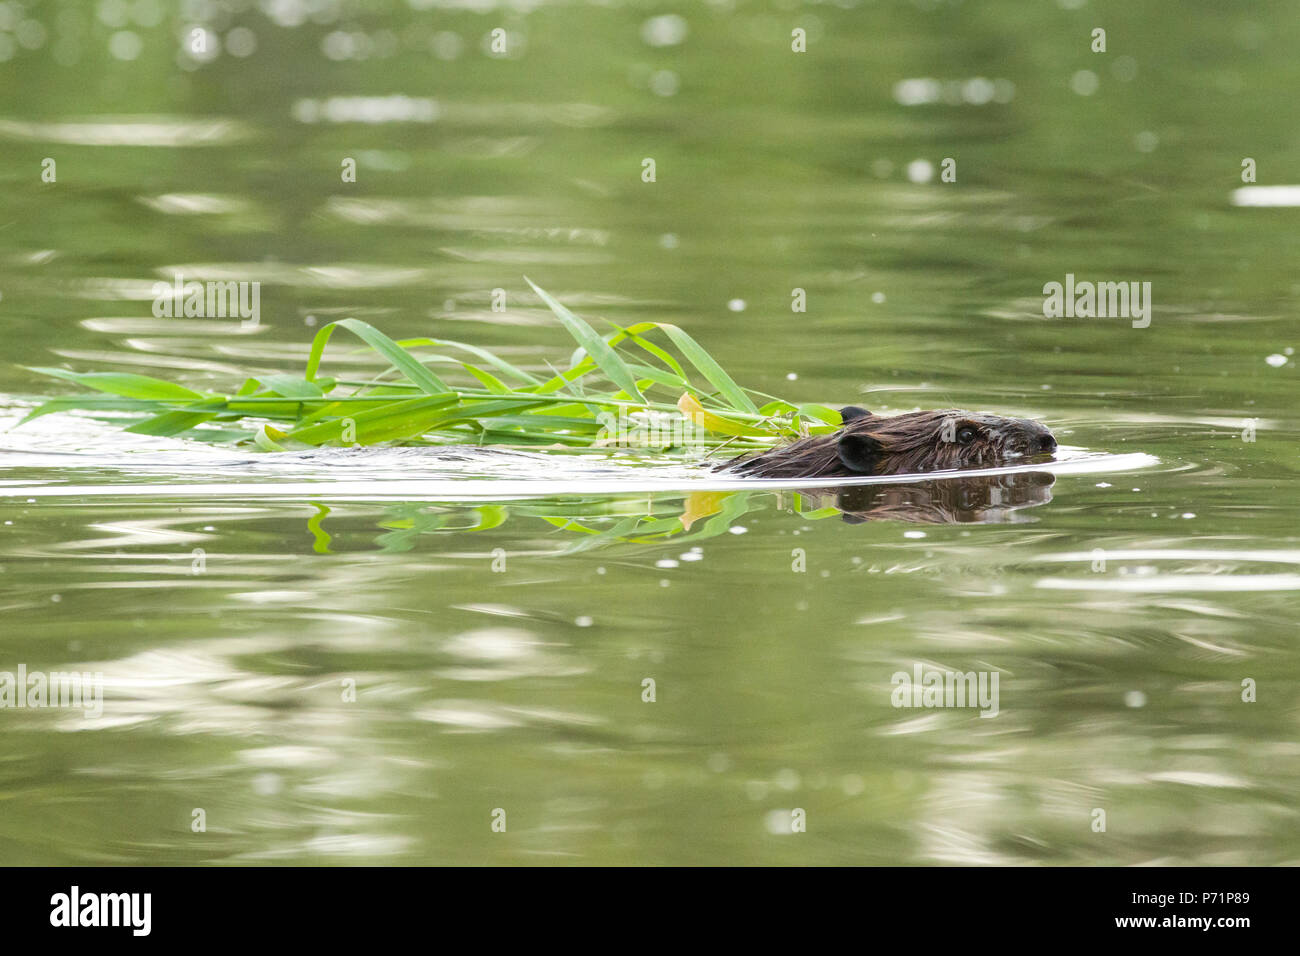 A North American beaver (Castor canadensis) swimming with food in its mouth back to its lodge. Stock Photo